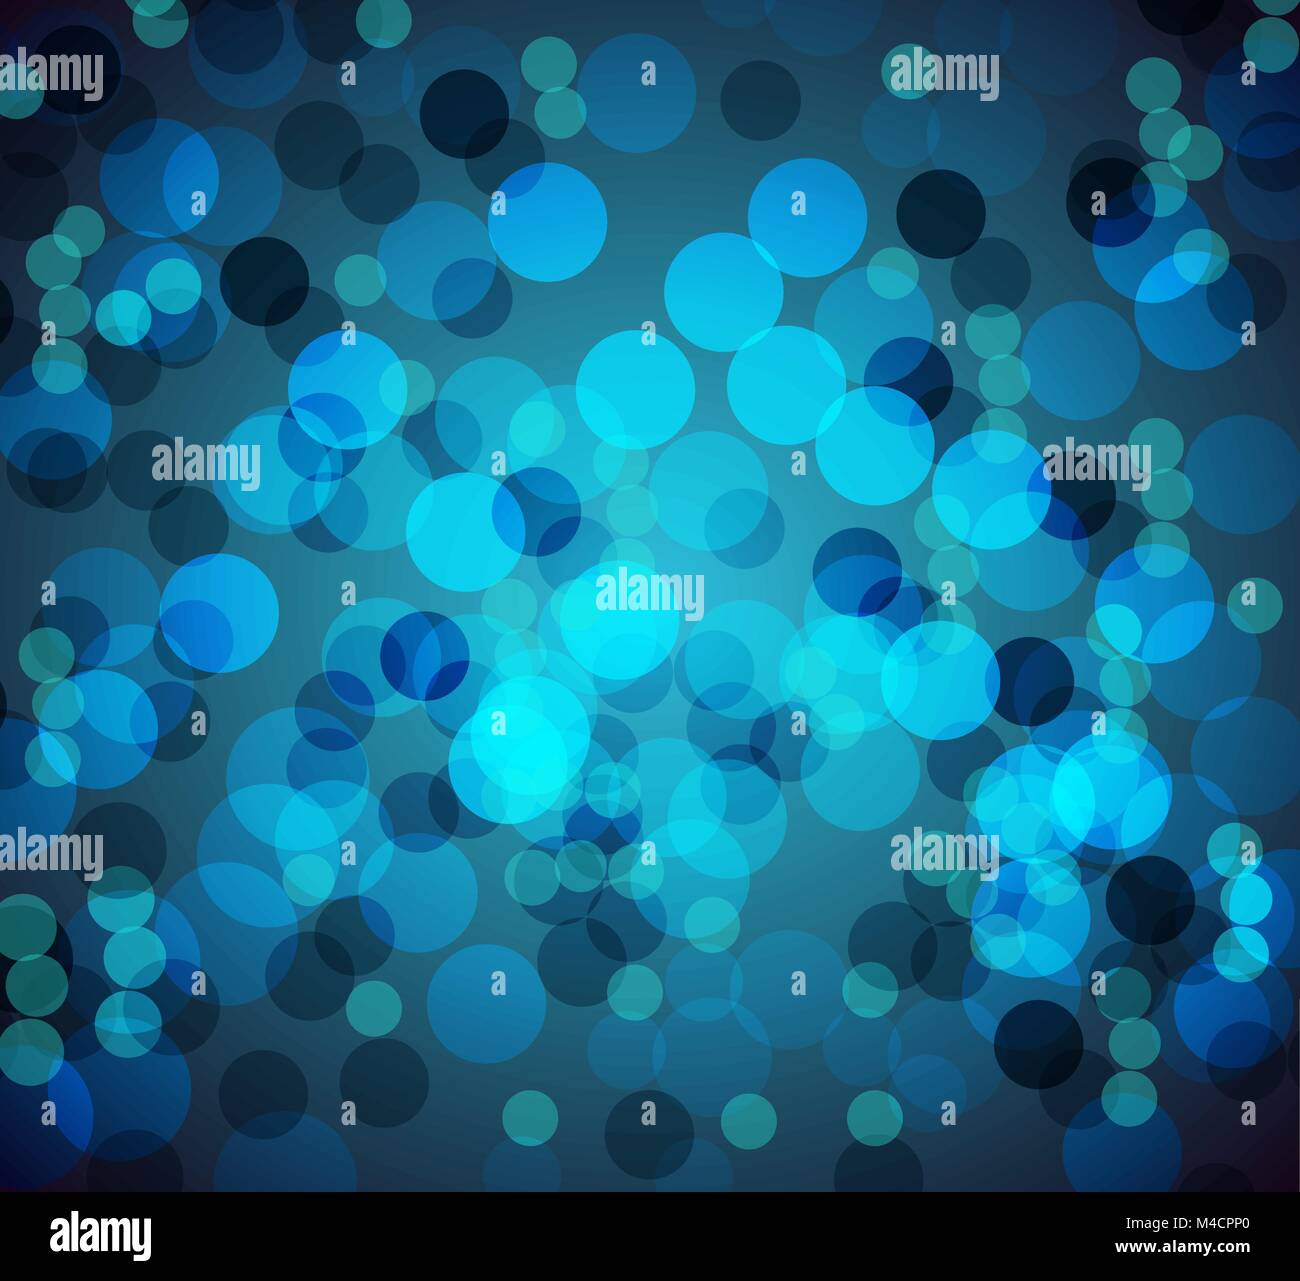 An image of a blue bokeh blurry lights background. Stock Vector